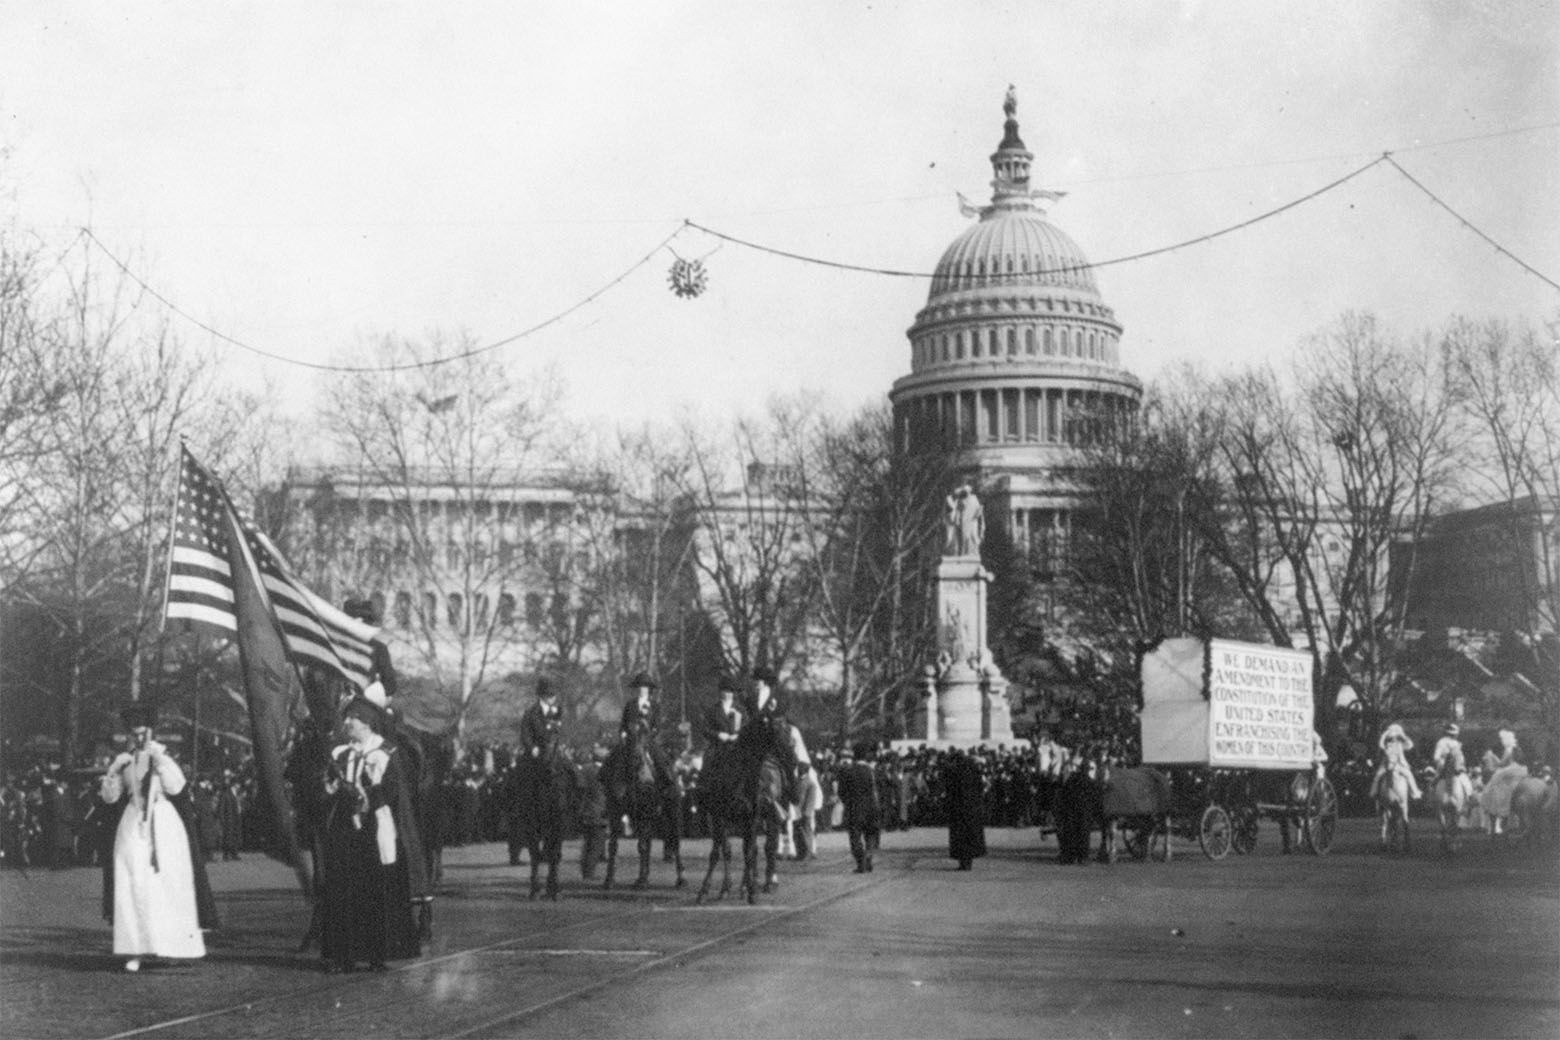 In this circa 1913 photo made available by the Library of Congress, demonstrators march in a women's suffrage parade near the Capitol building in Washington. A horse and cart pulls a sign which reads, "We demand an amendment to the constitution of the United States enfranchising the women of this country." (Harris &amp; Ewing/Library of Congress via AP)